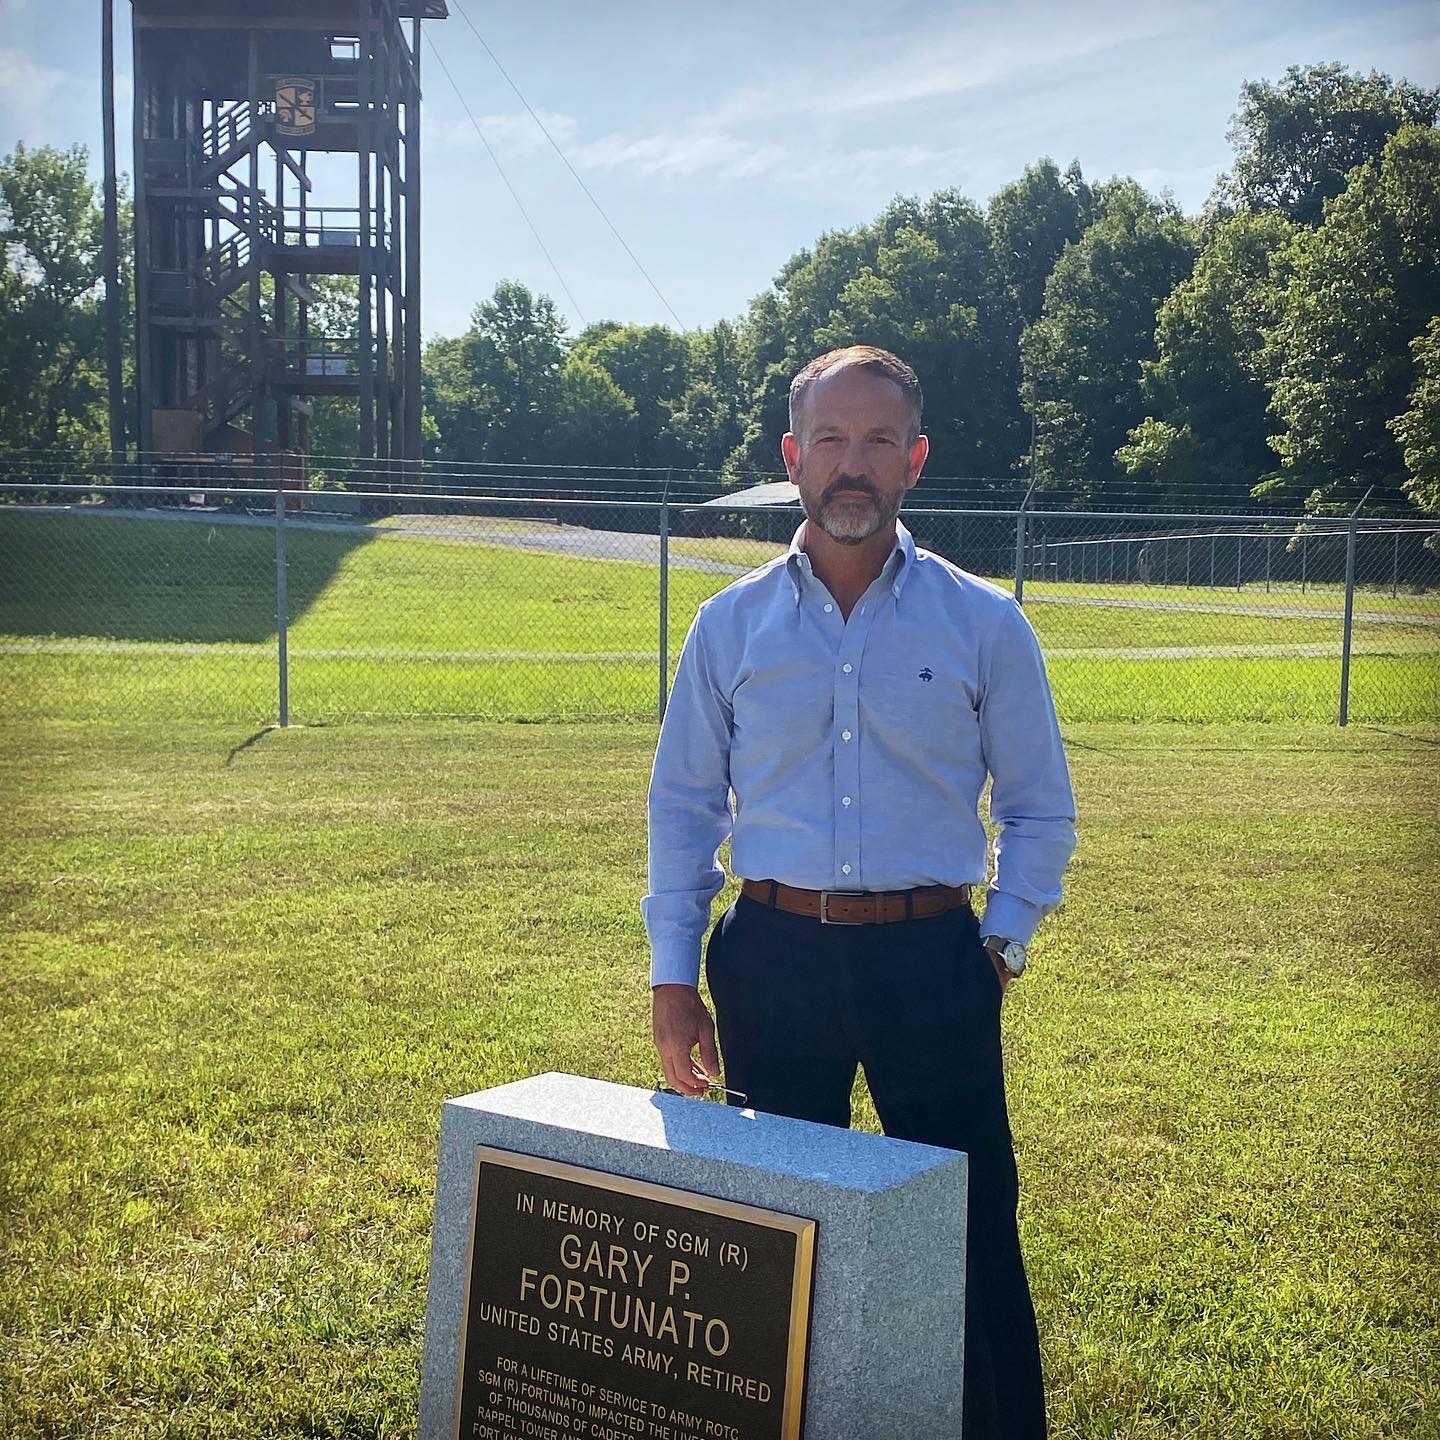 Man in a blue shirt and jeans standing next to a memorial stone in a grassy field with a tower in the background, symbolizing the commitment of Human Resources Operations to workforce optimization and honoring legacy.